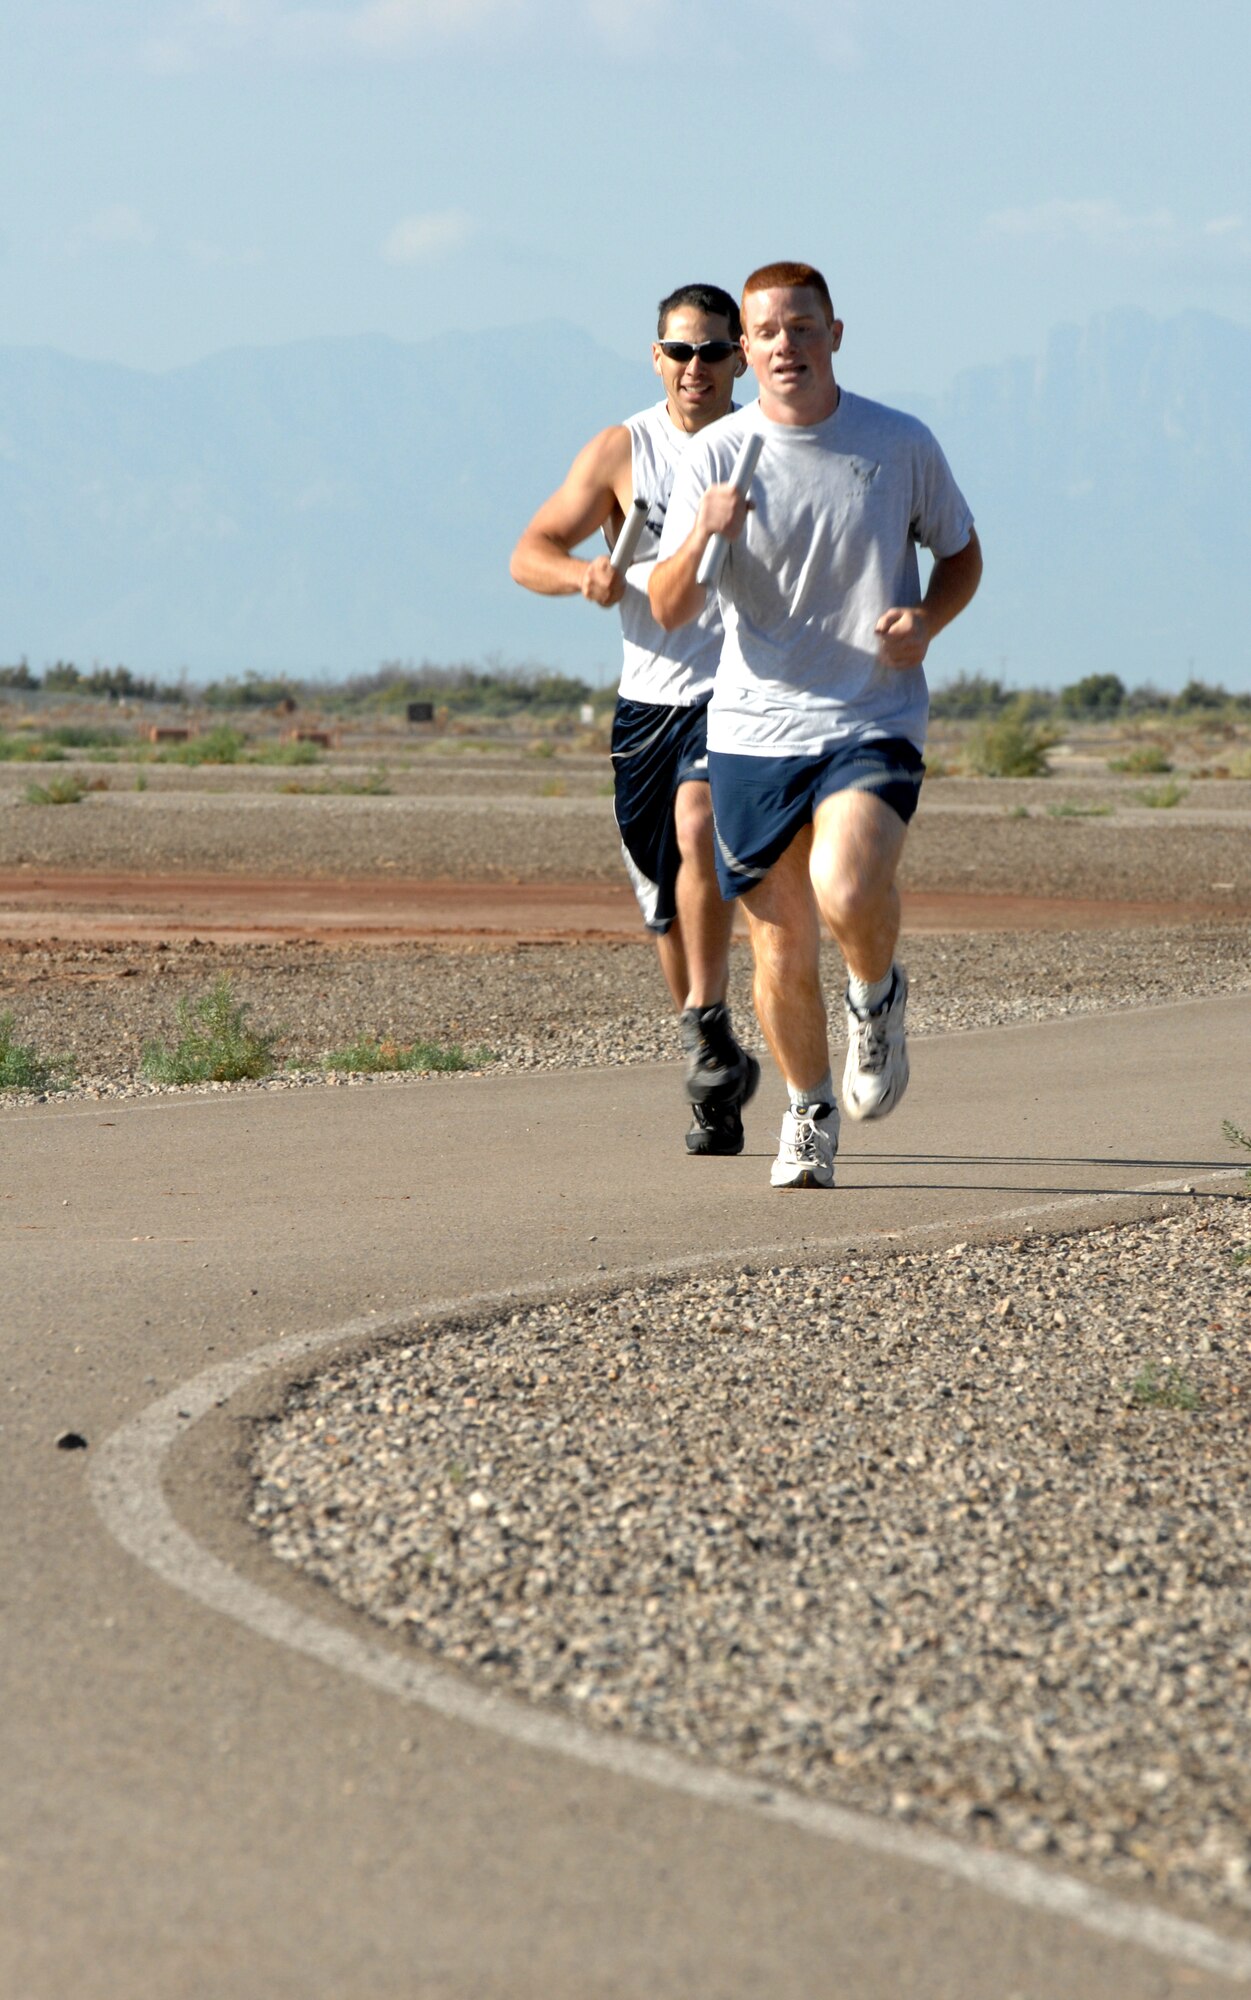 Two participants from the large squadron category run neck-in-neck in the three-mile relay on Sports Day at Holloman Air Force Base, N.M., October 10. The Fitness and Sports Center held 15 events and over 2000 Team Holloman members participated in the event. (U.S. Air Force photo/Airman Sondra M. Escutia)